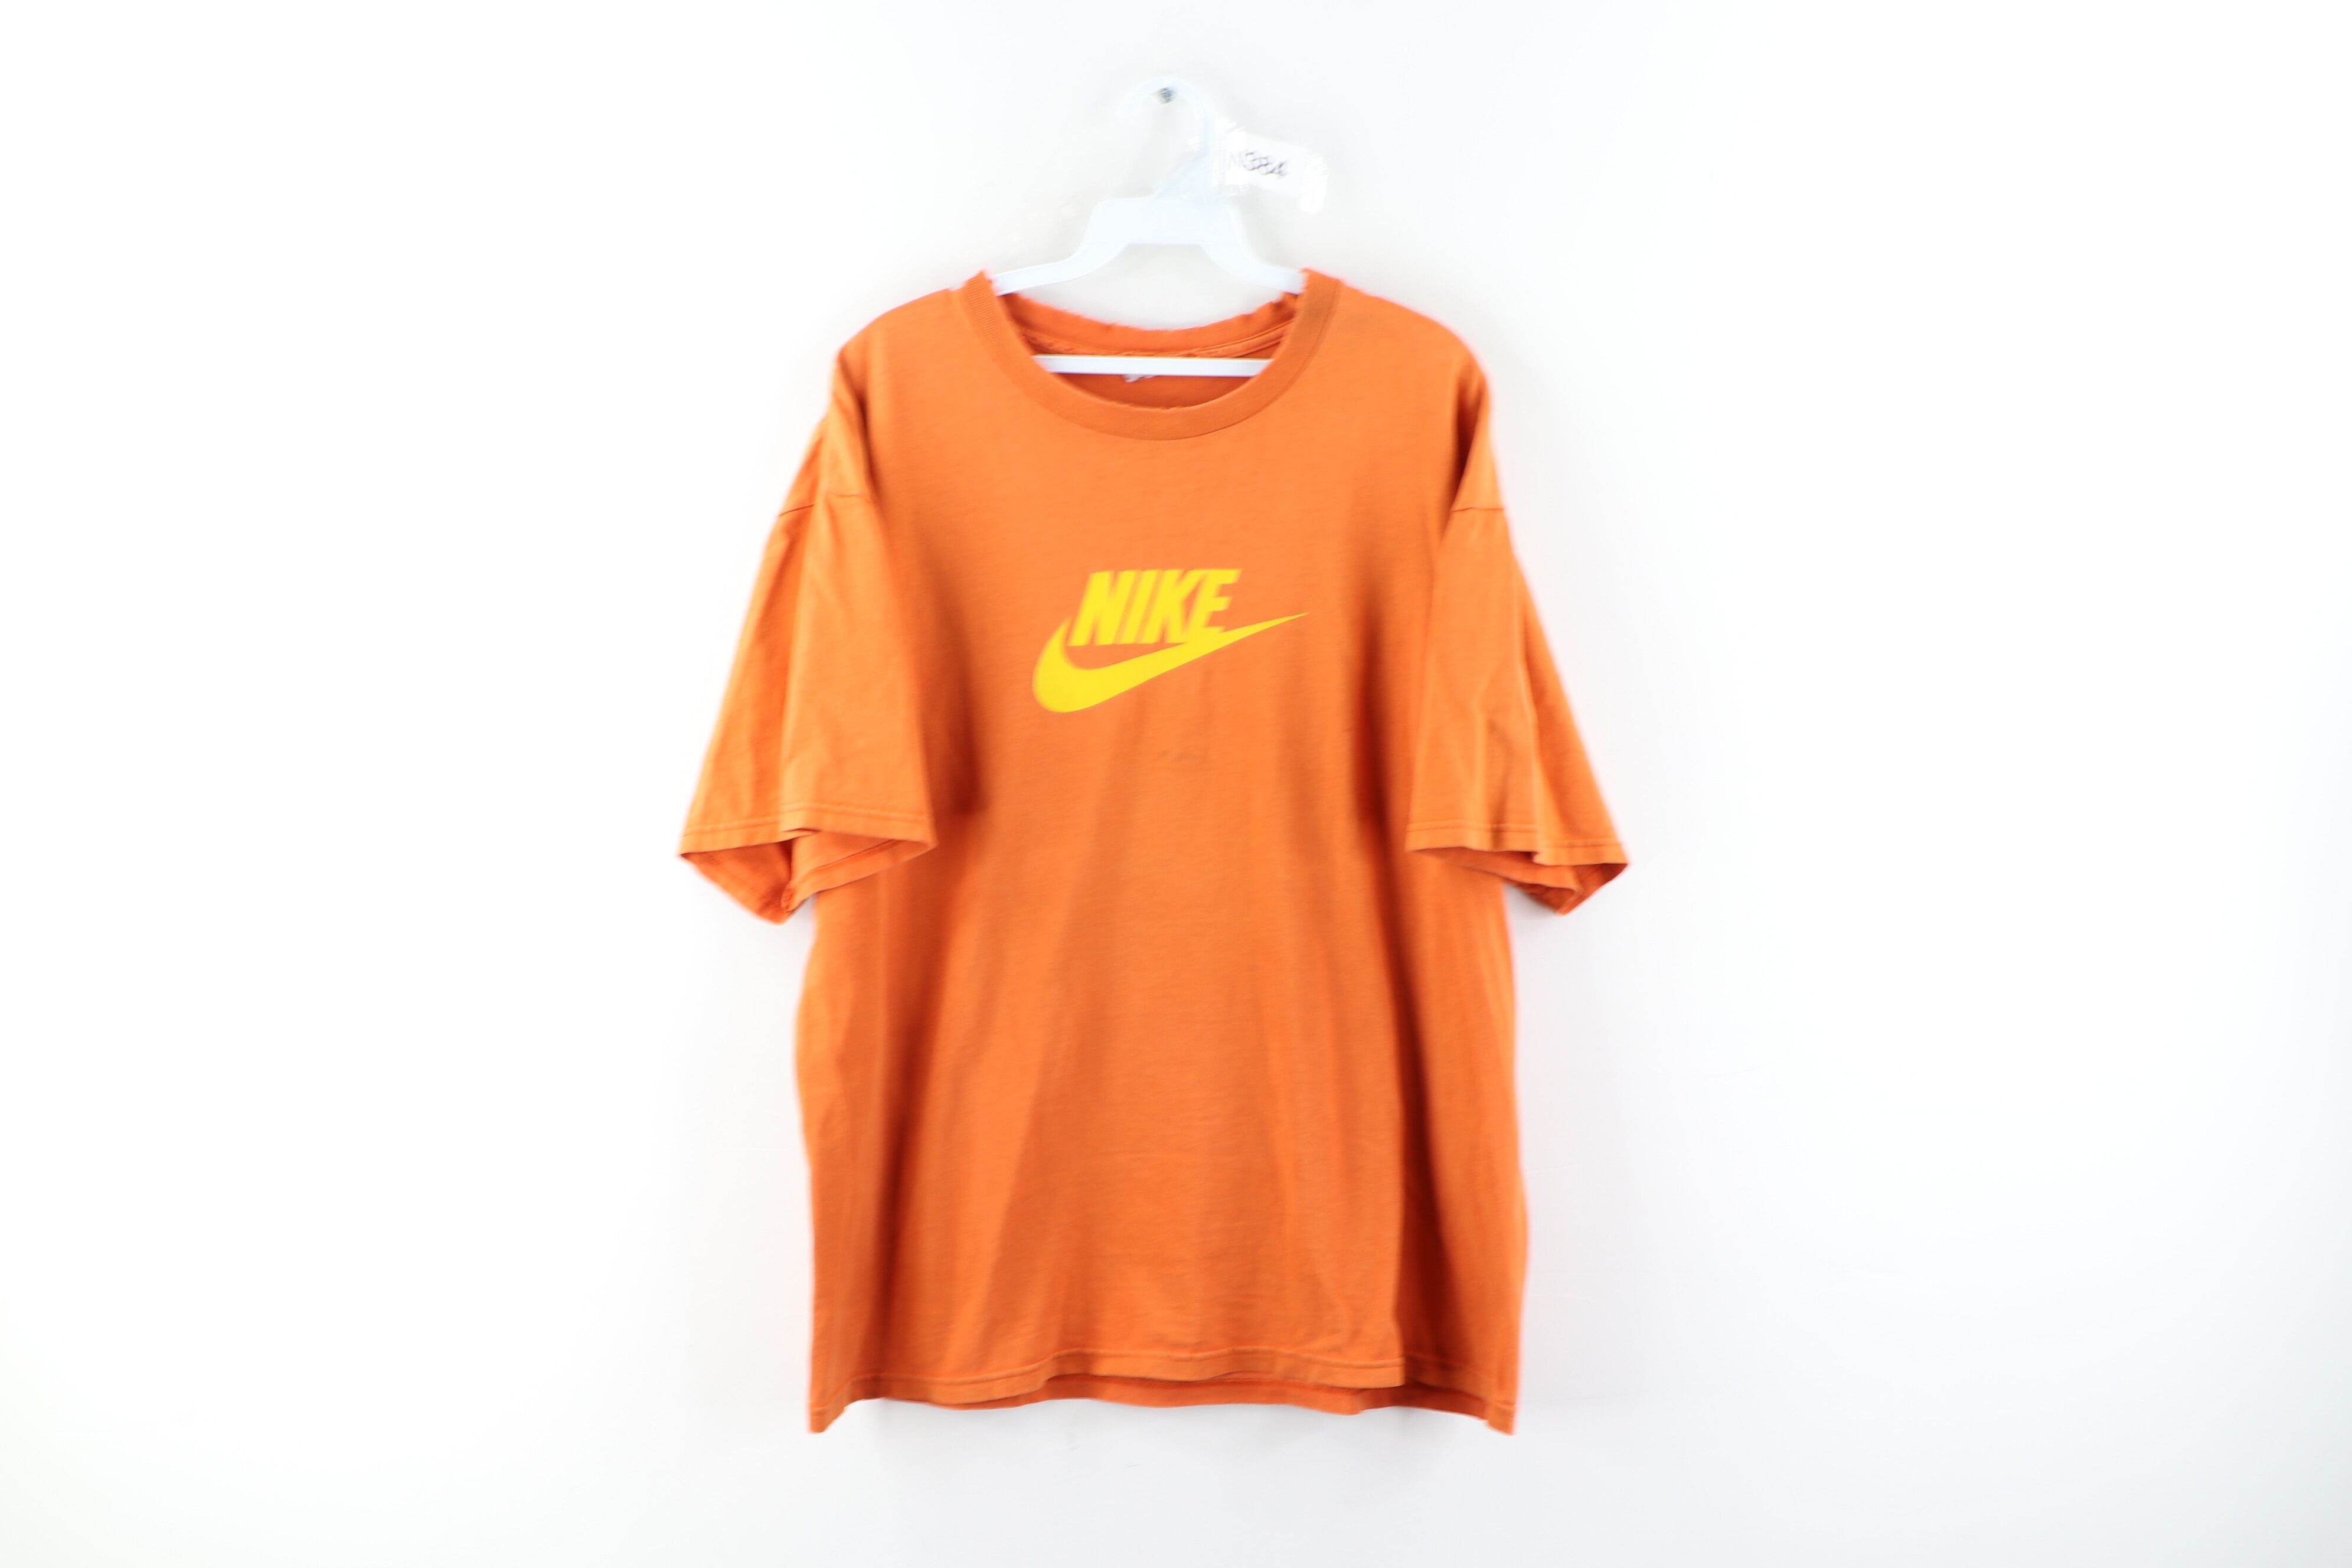 Nike Vintage Nike Travis Scott Spell Out Swoosh Thrashed T-Shirt Size US XL / EU 56 / 4 - 1 Preview